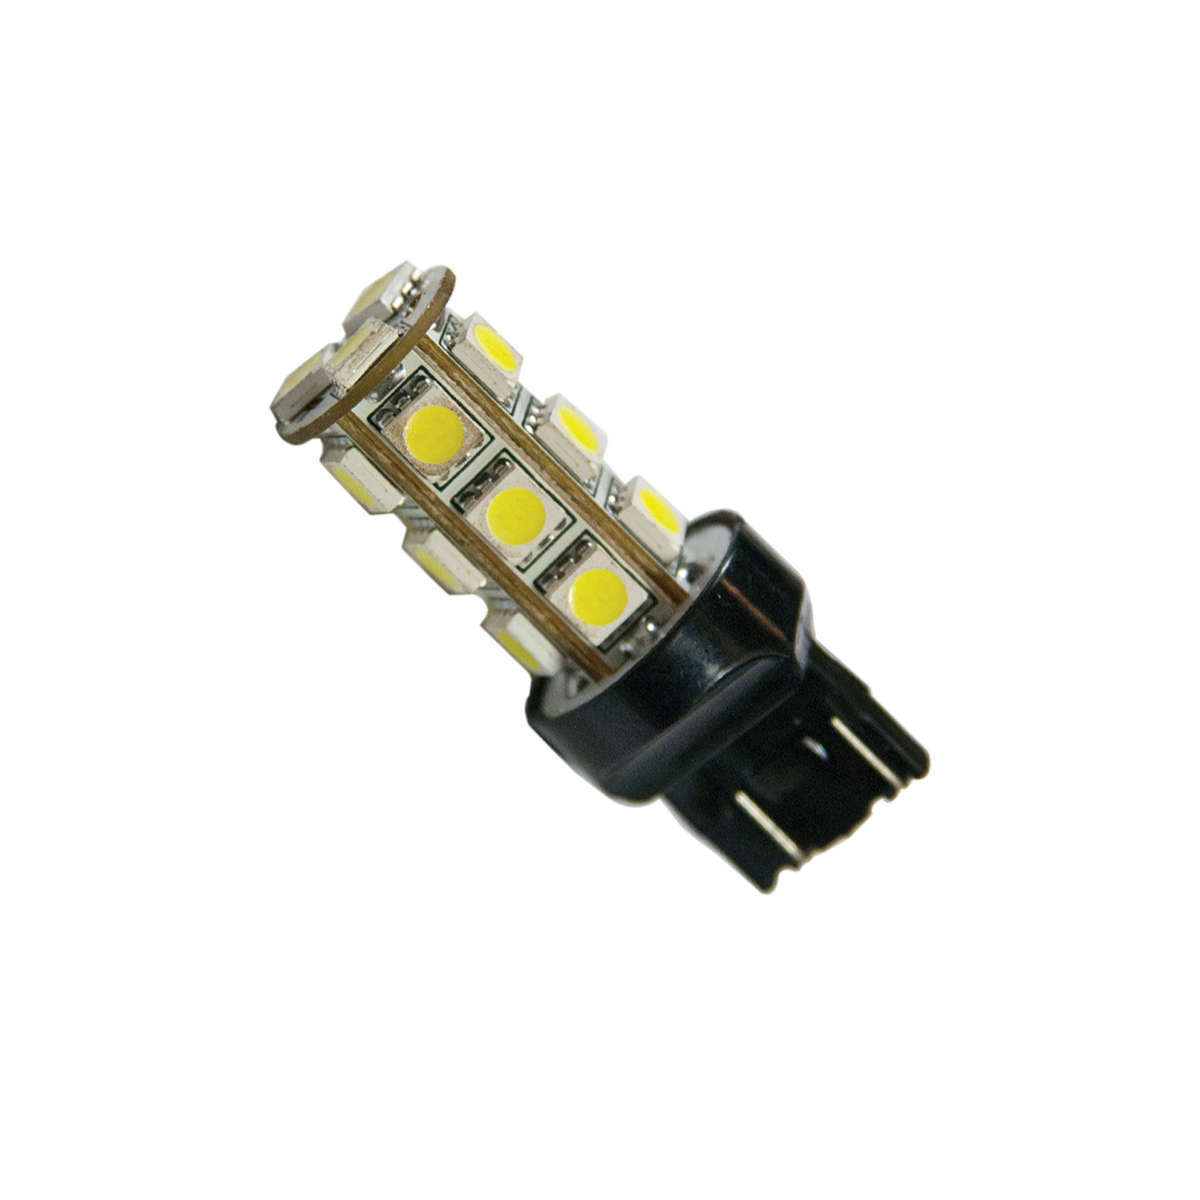 ORACLE LIGHTING 7443 18 LED 3-Chip SMD Bulb Single Cool White